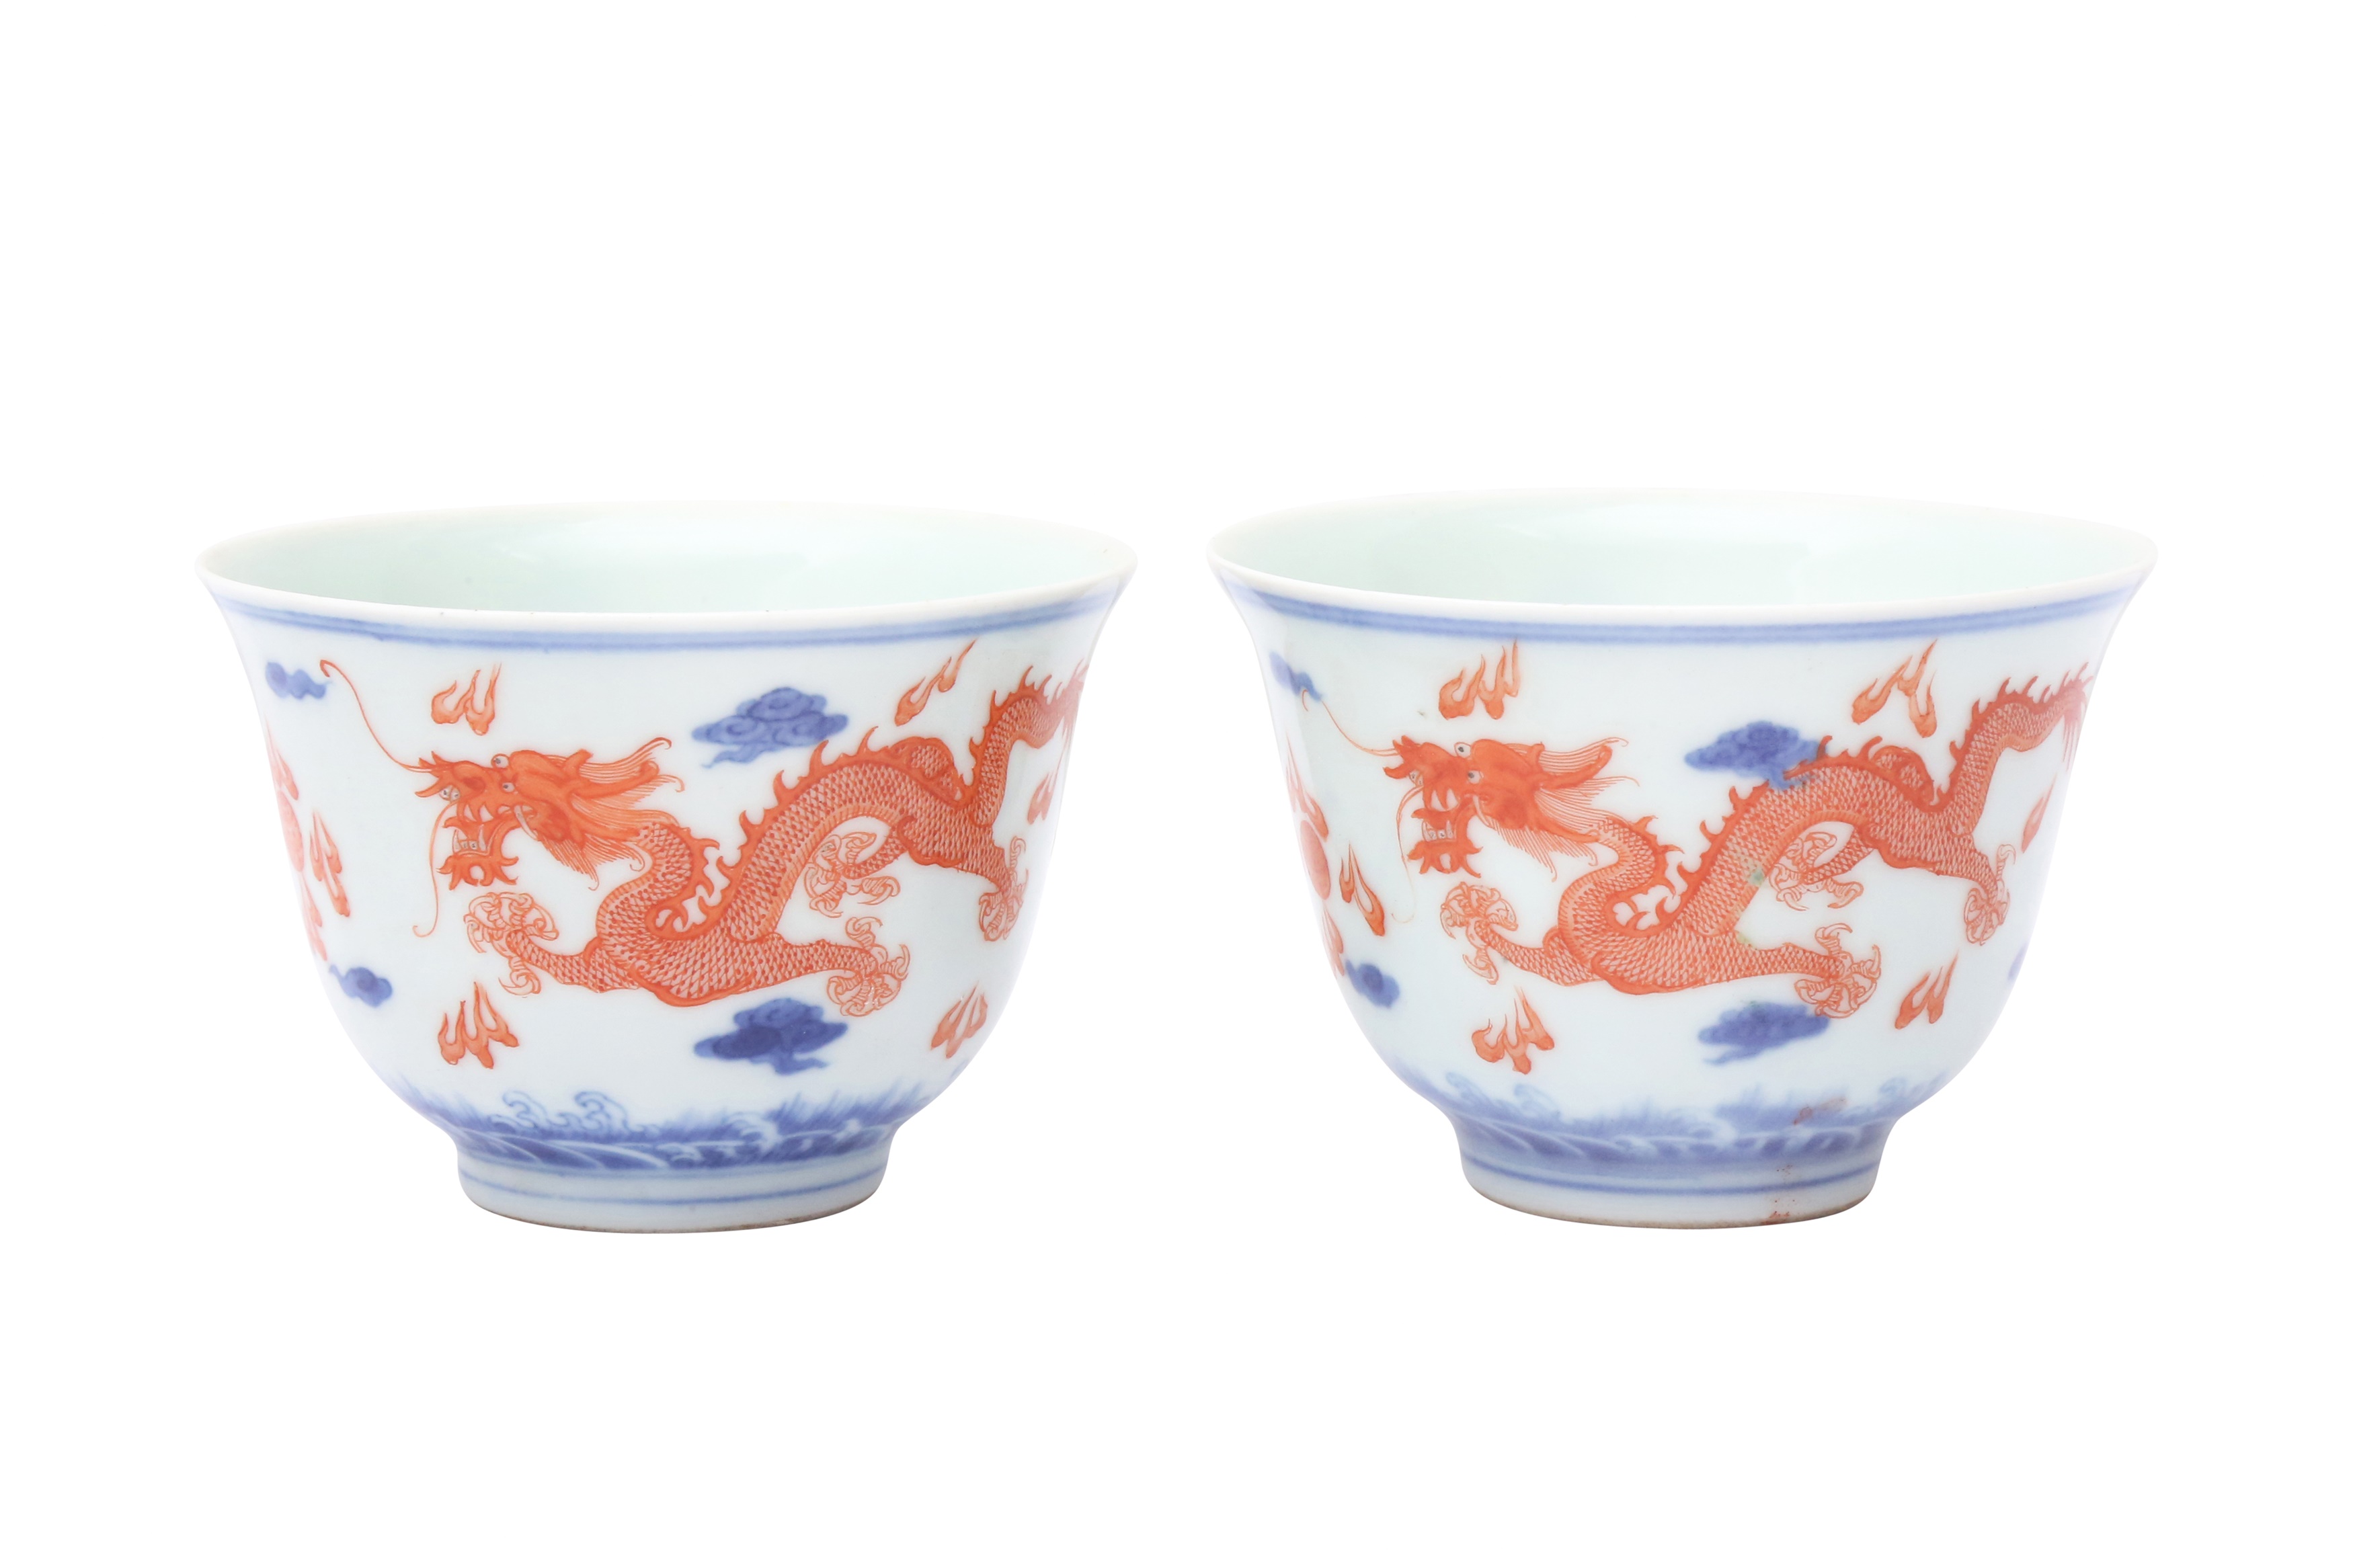 A PAIR OF CHINESE BLUE AND WHITE AND IRON-RED 'DRAGON' CUPS 清嘉慶 青花釉裡紅龍紋盃